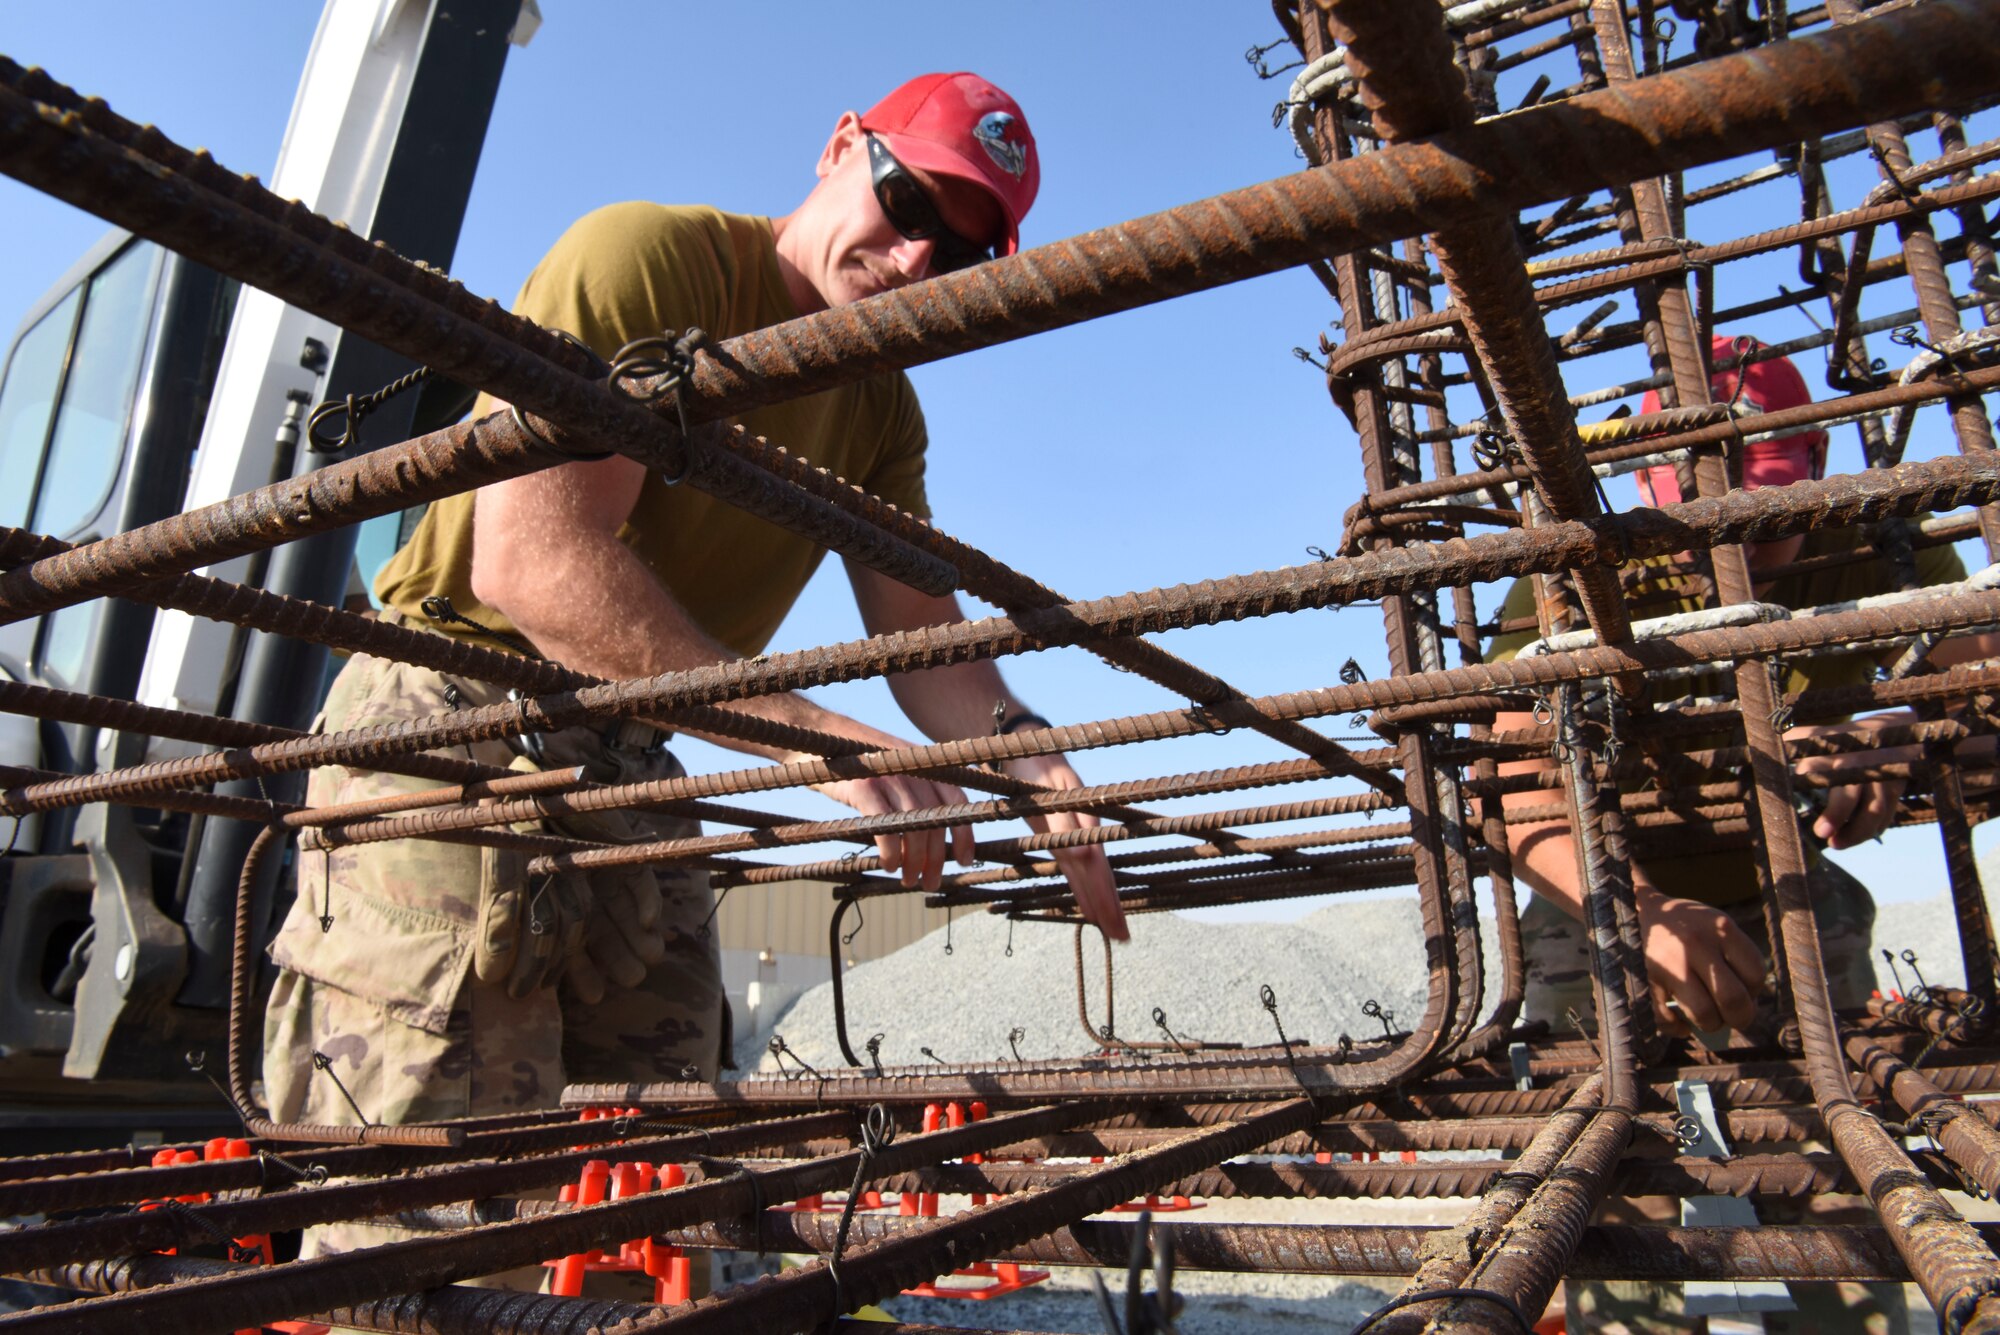 Tech. Sgt. Tracee Crane, 557th Expeditionary Rapid Engineer Deployable Heavy Operational Repair Squadron, Engineering pavement and equipment operator, places concrete chairs onto rebar during construction of Air Field Damage repair equipment warehouse, Dec. 23, 2018 at Al Dhafra Air Base, United Arab Emirates.